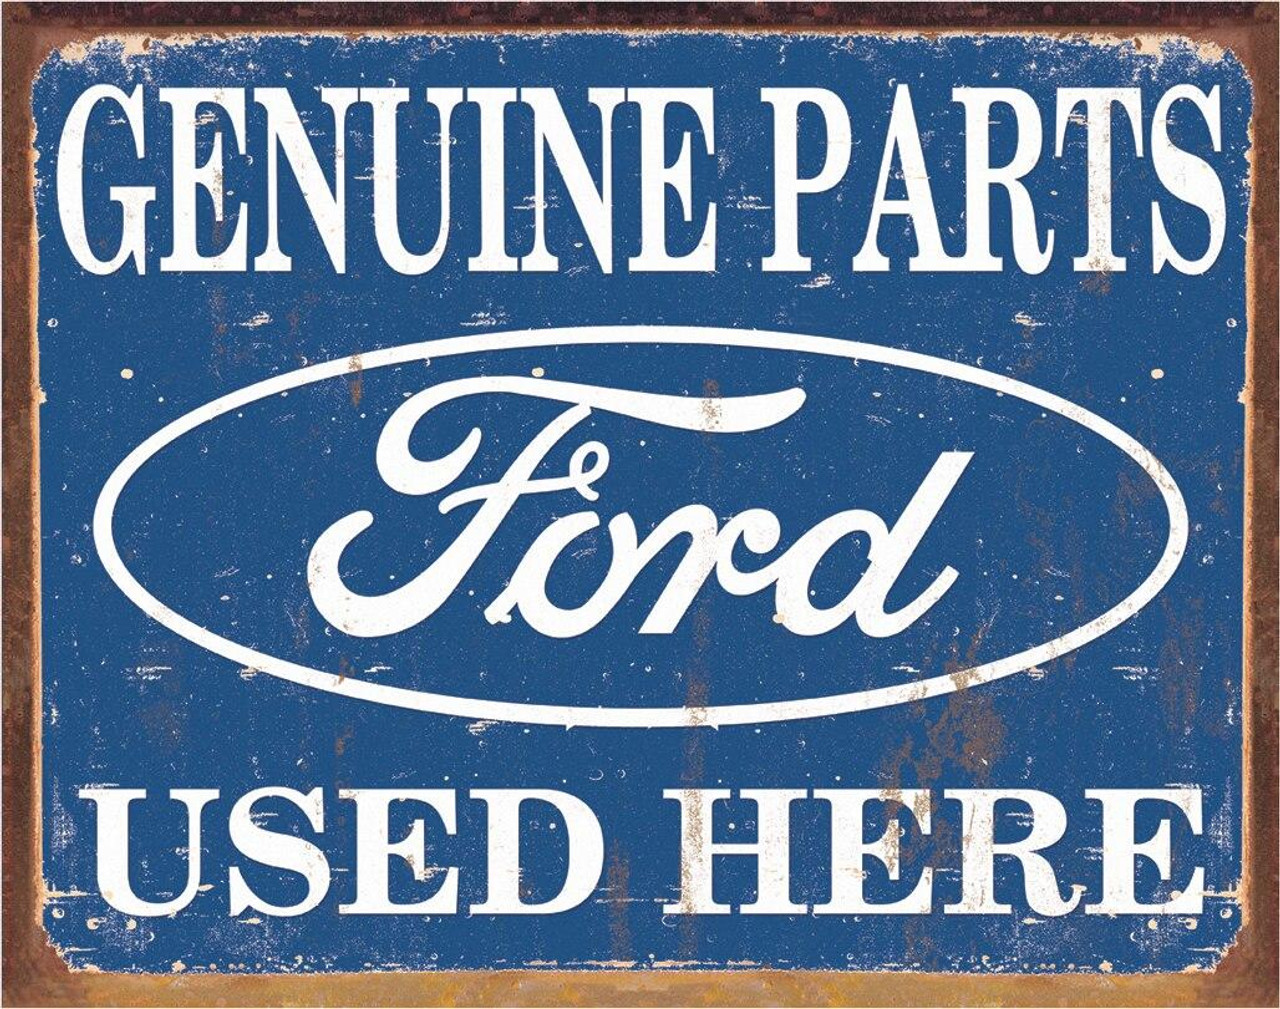 ƥ  FORD PARTS USED HERE DE-MS1422ƥ  FORD PARTS USED HERE DE-MS1422